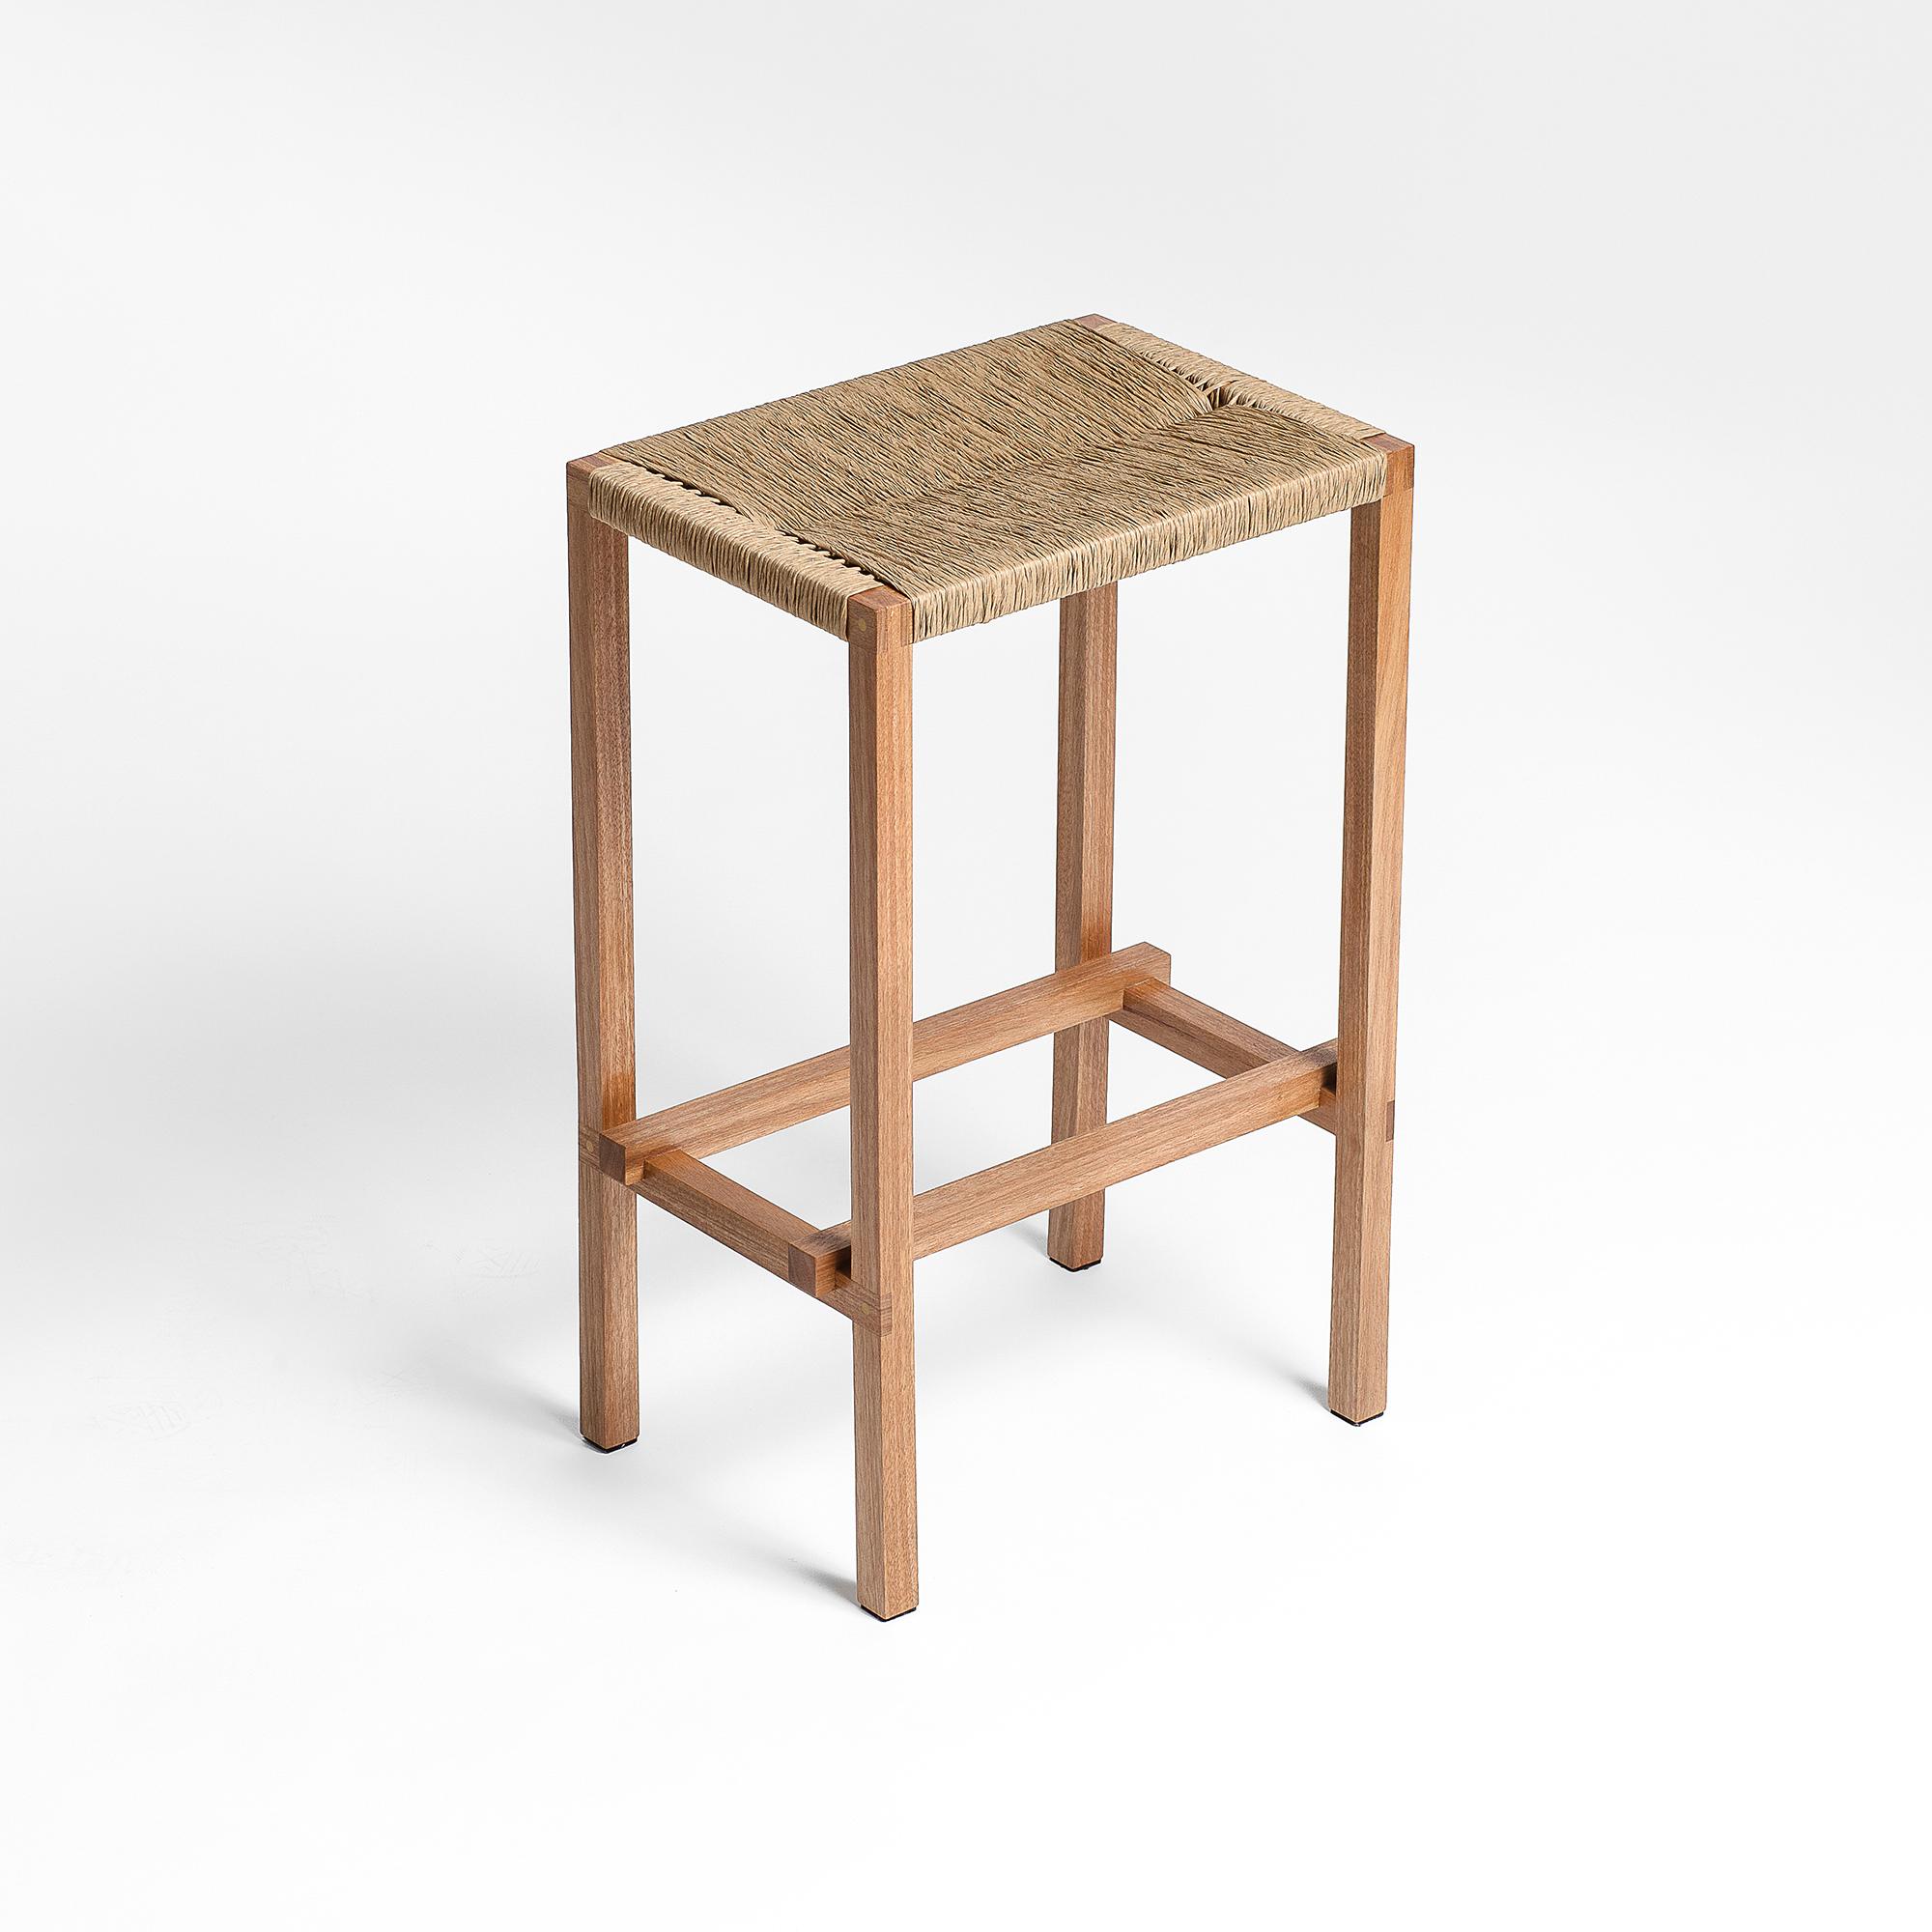 The M2 Stool offers a clean silhouette with rich texture and robust structure.  Handcrafted in traditional woodworking techniques with certified brazilian hardwood. M2 Stool wooden joints are made visible, making a subtil contrast between its shades